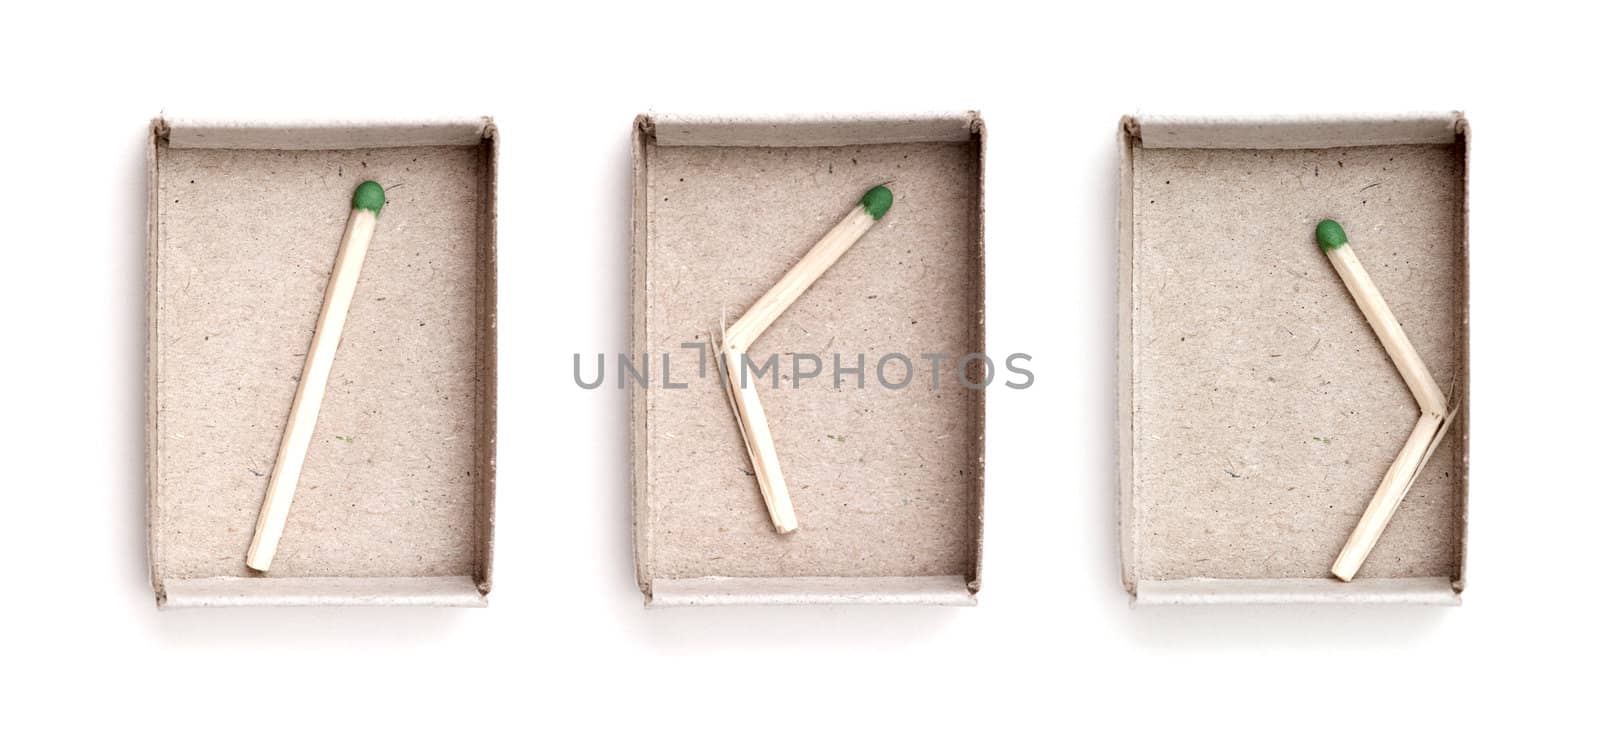 Matchbox and last match isolated on white background